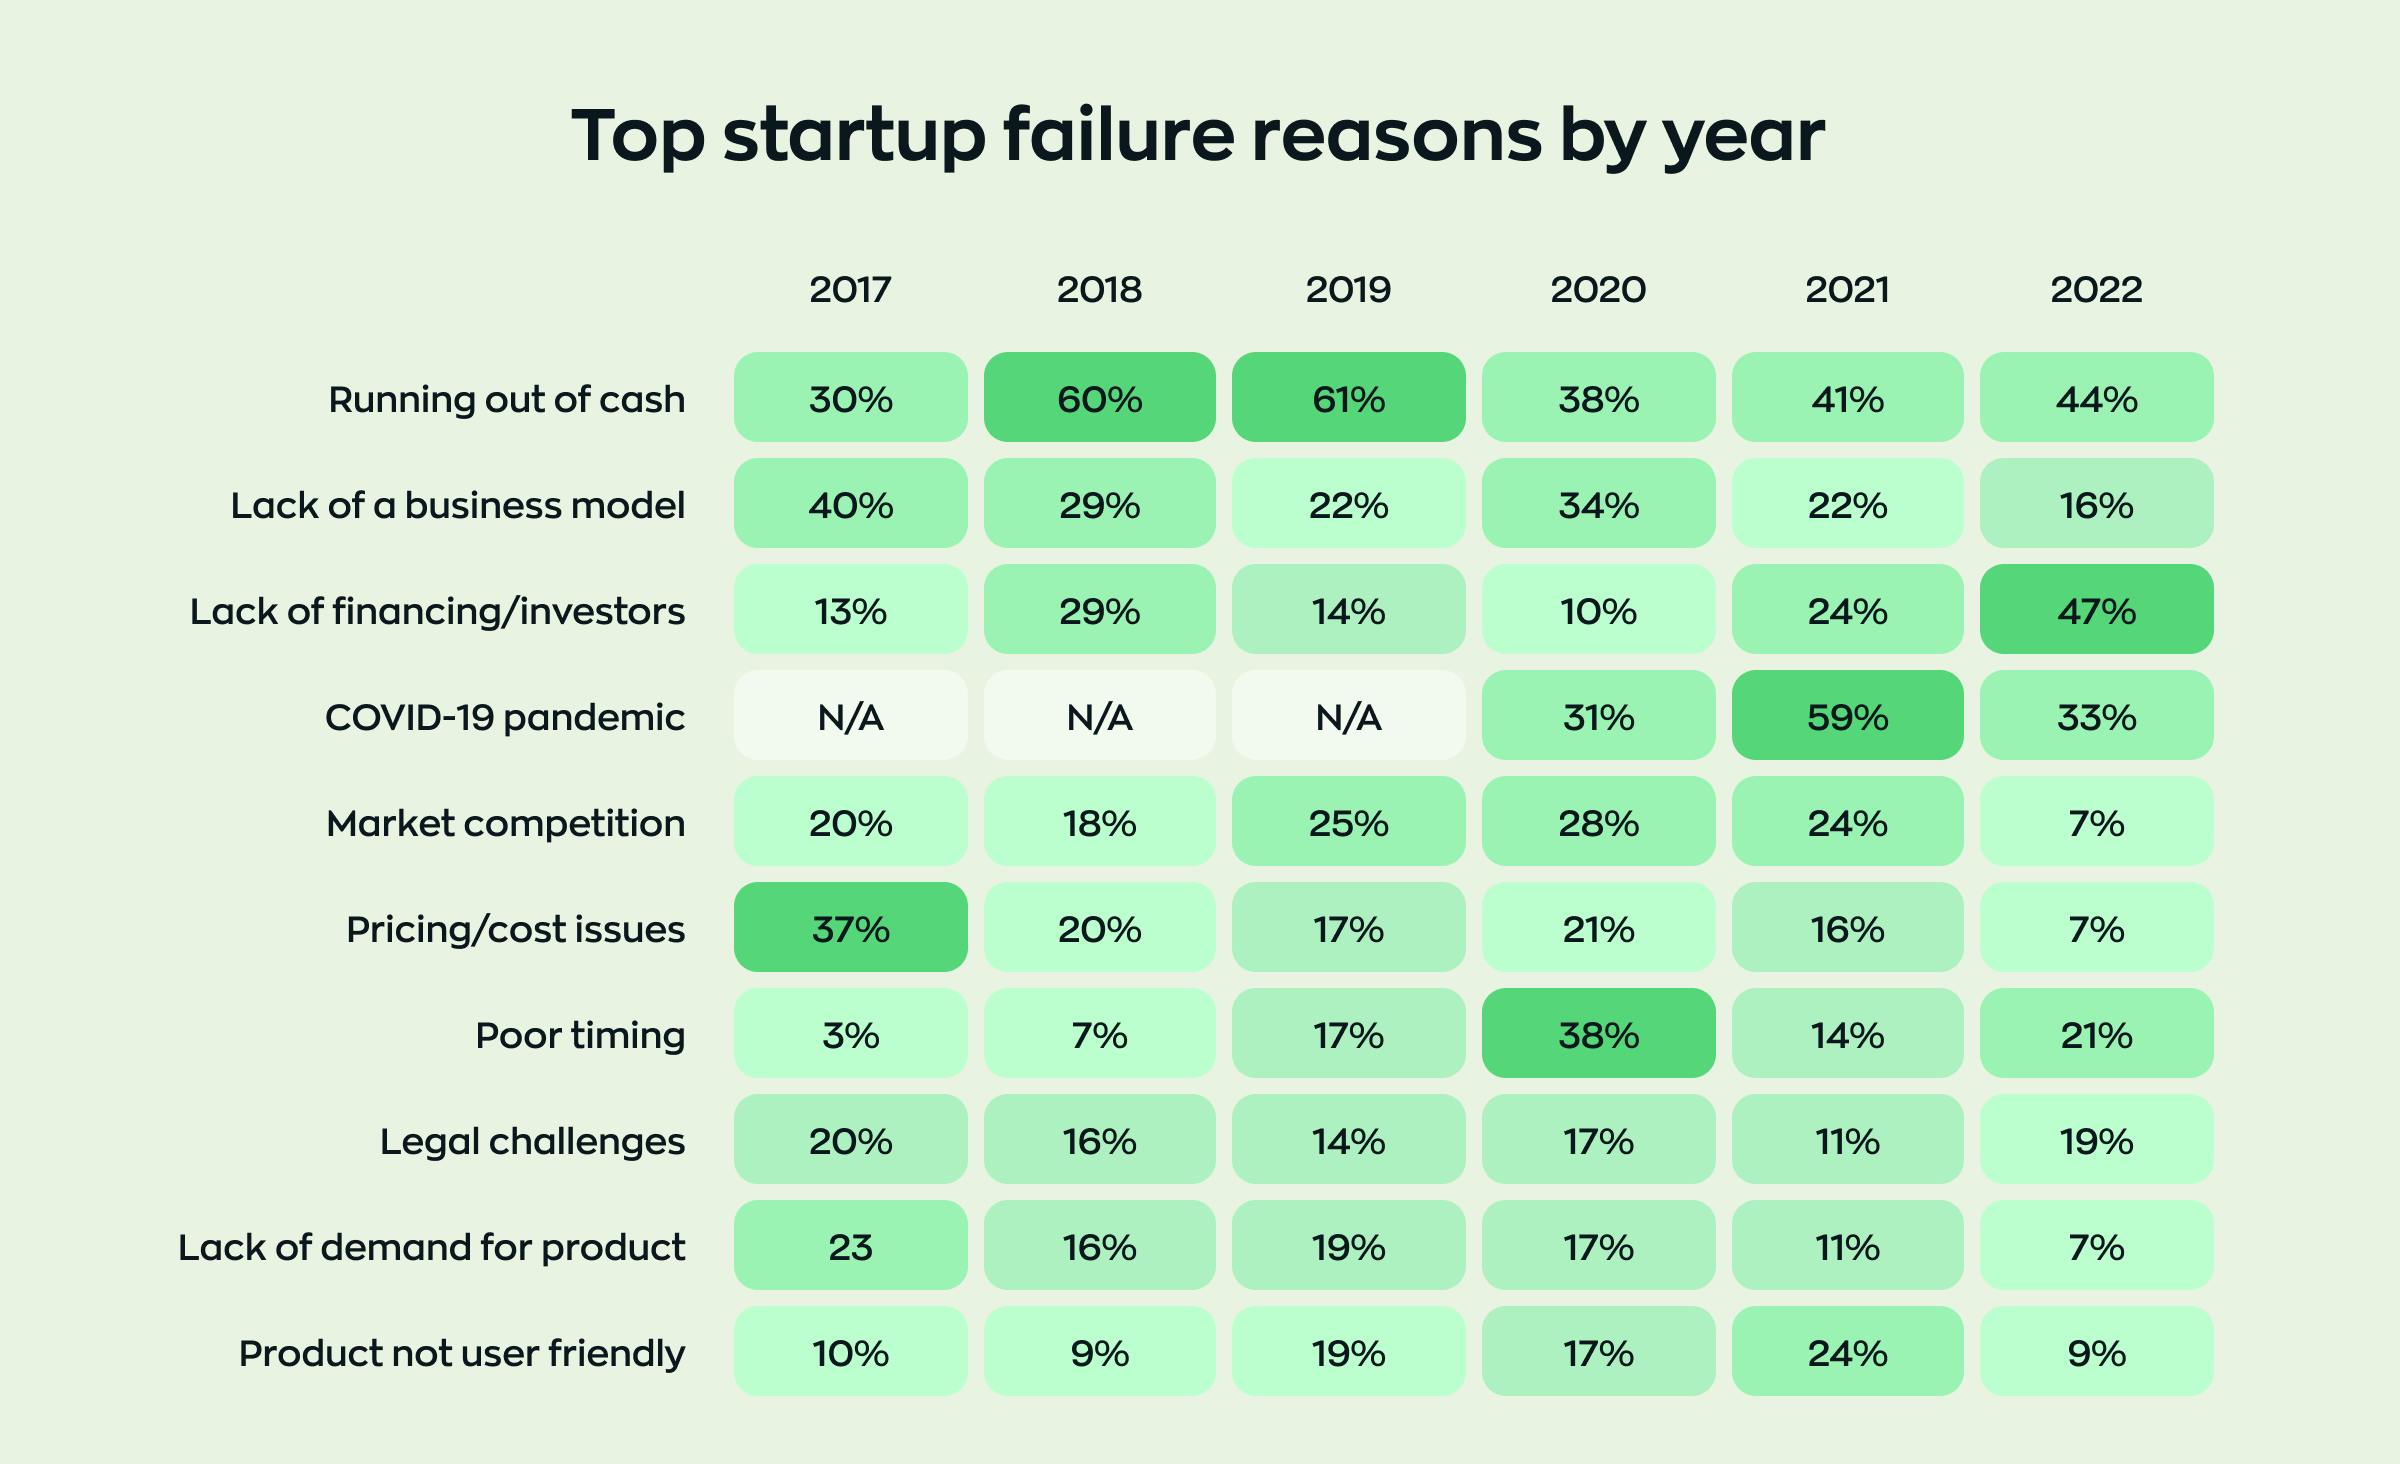 This statistics show top reasons for startup failure by year, these challenges can be solved by choosing startup services